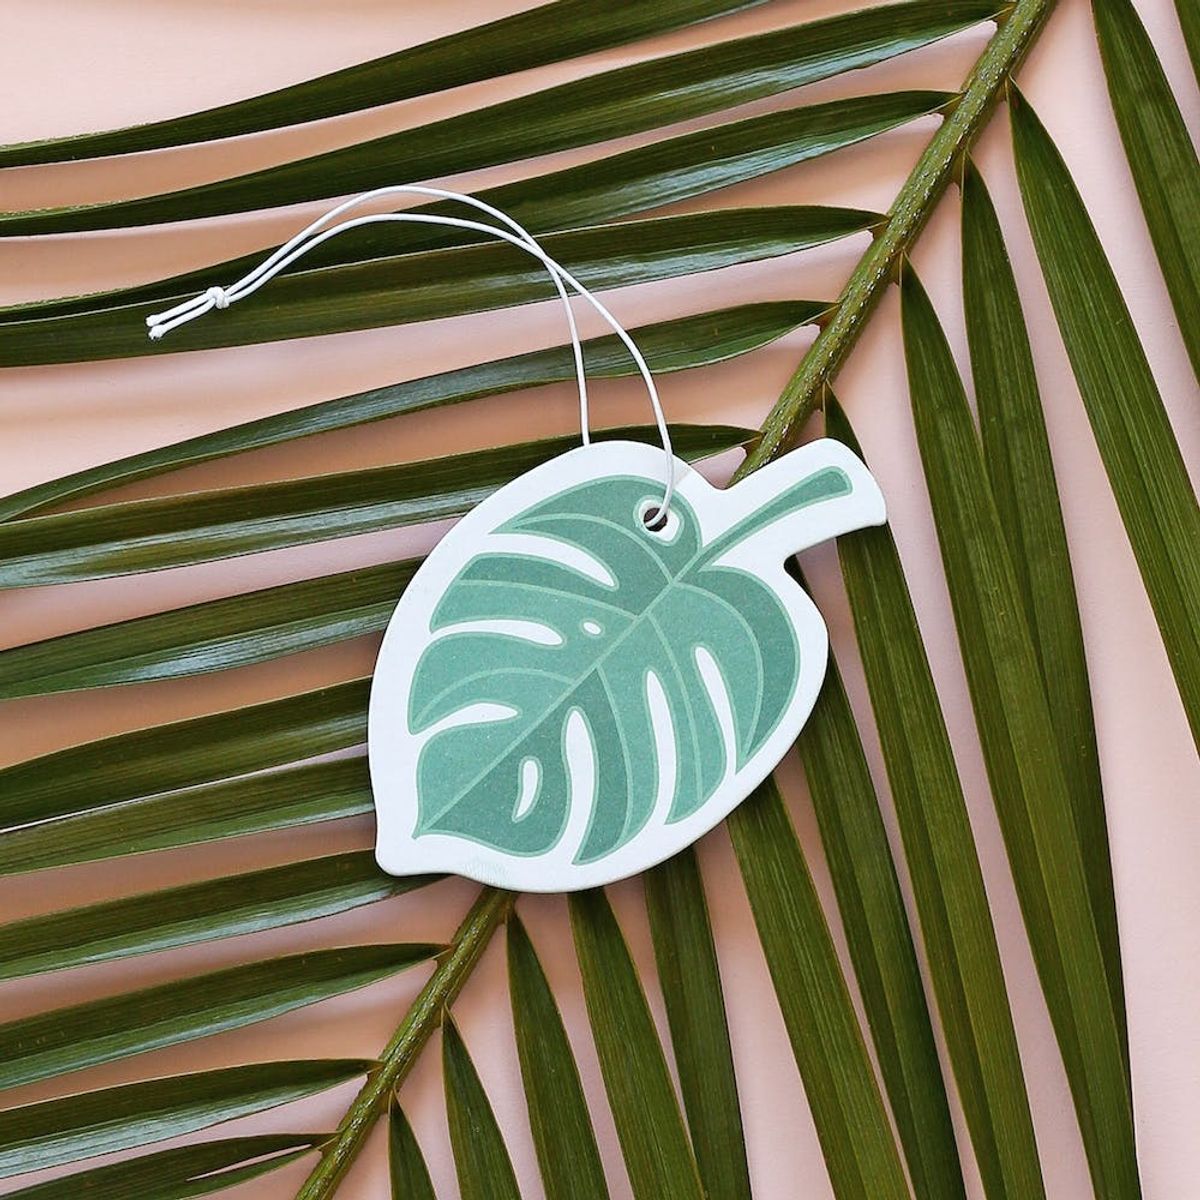 This Company Is Turning Out the Trendiest Air Fresheners EVER